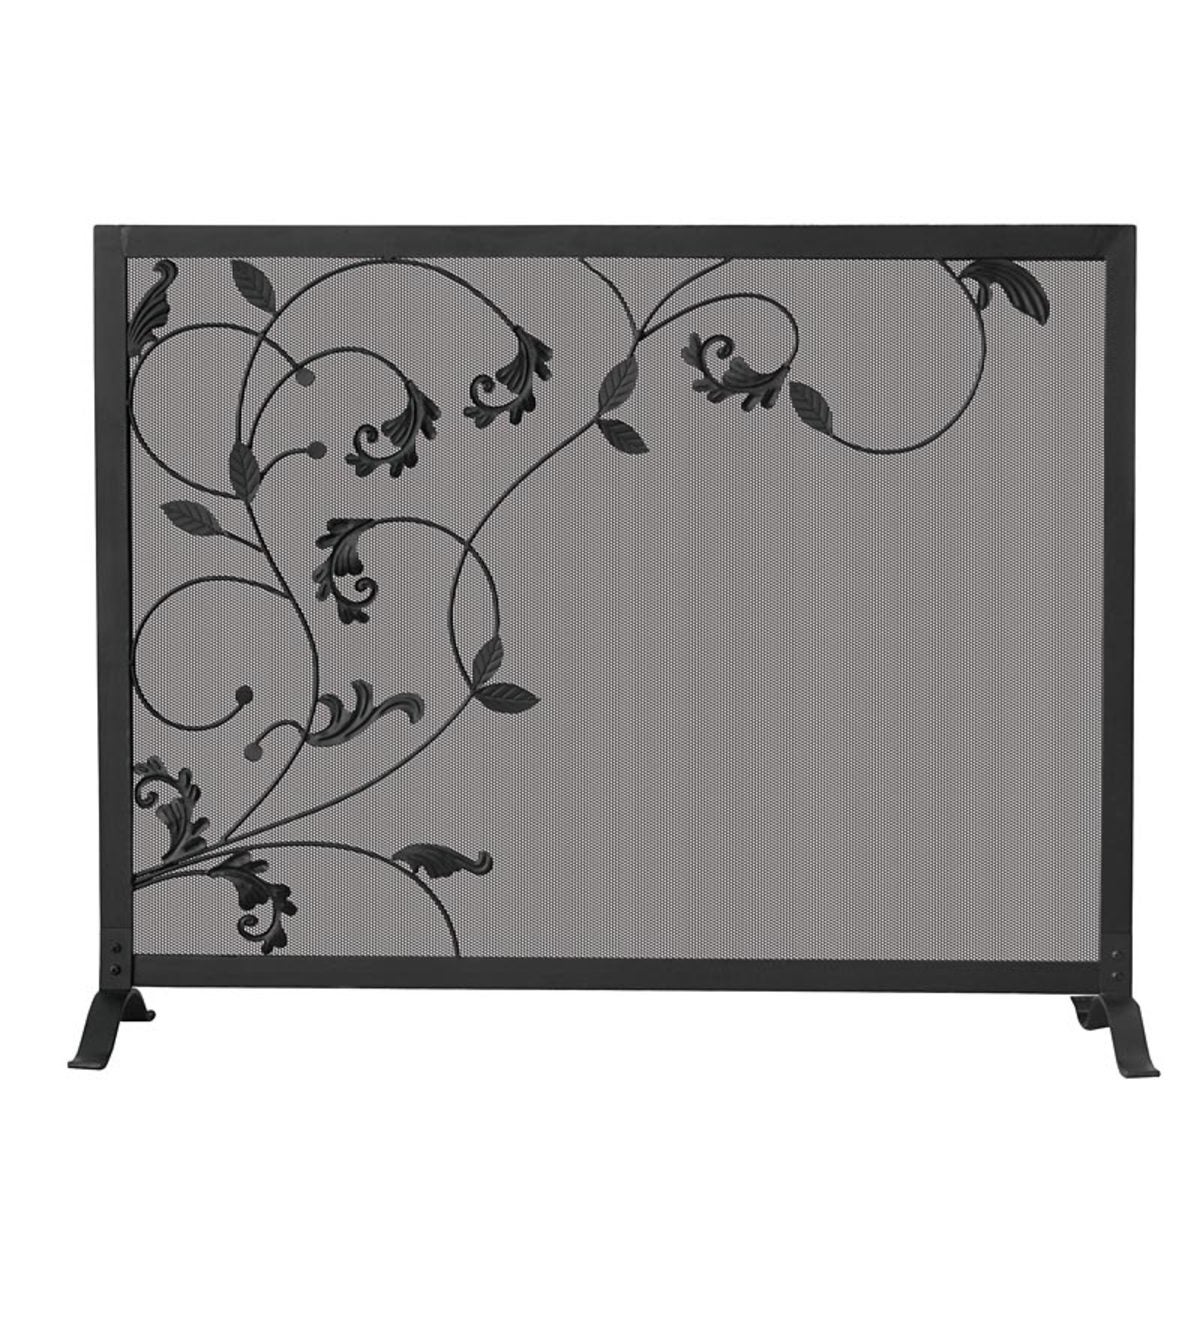 Black Wrought Iron Single Panel Fireplace Screen with Flowing Leaf Design